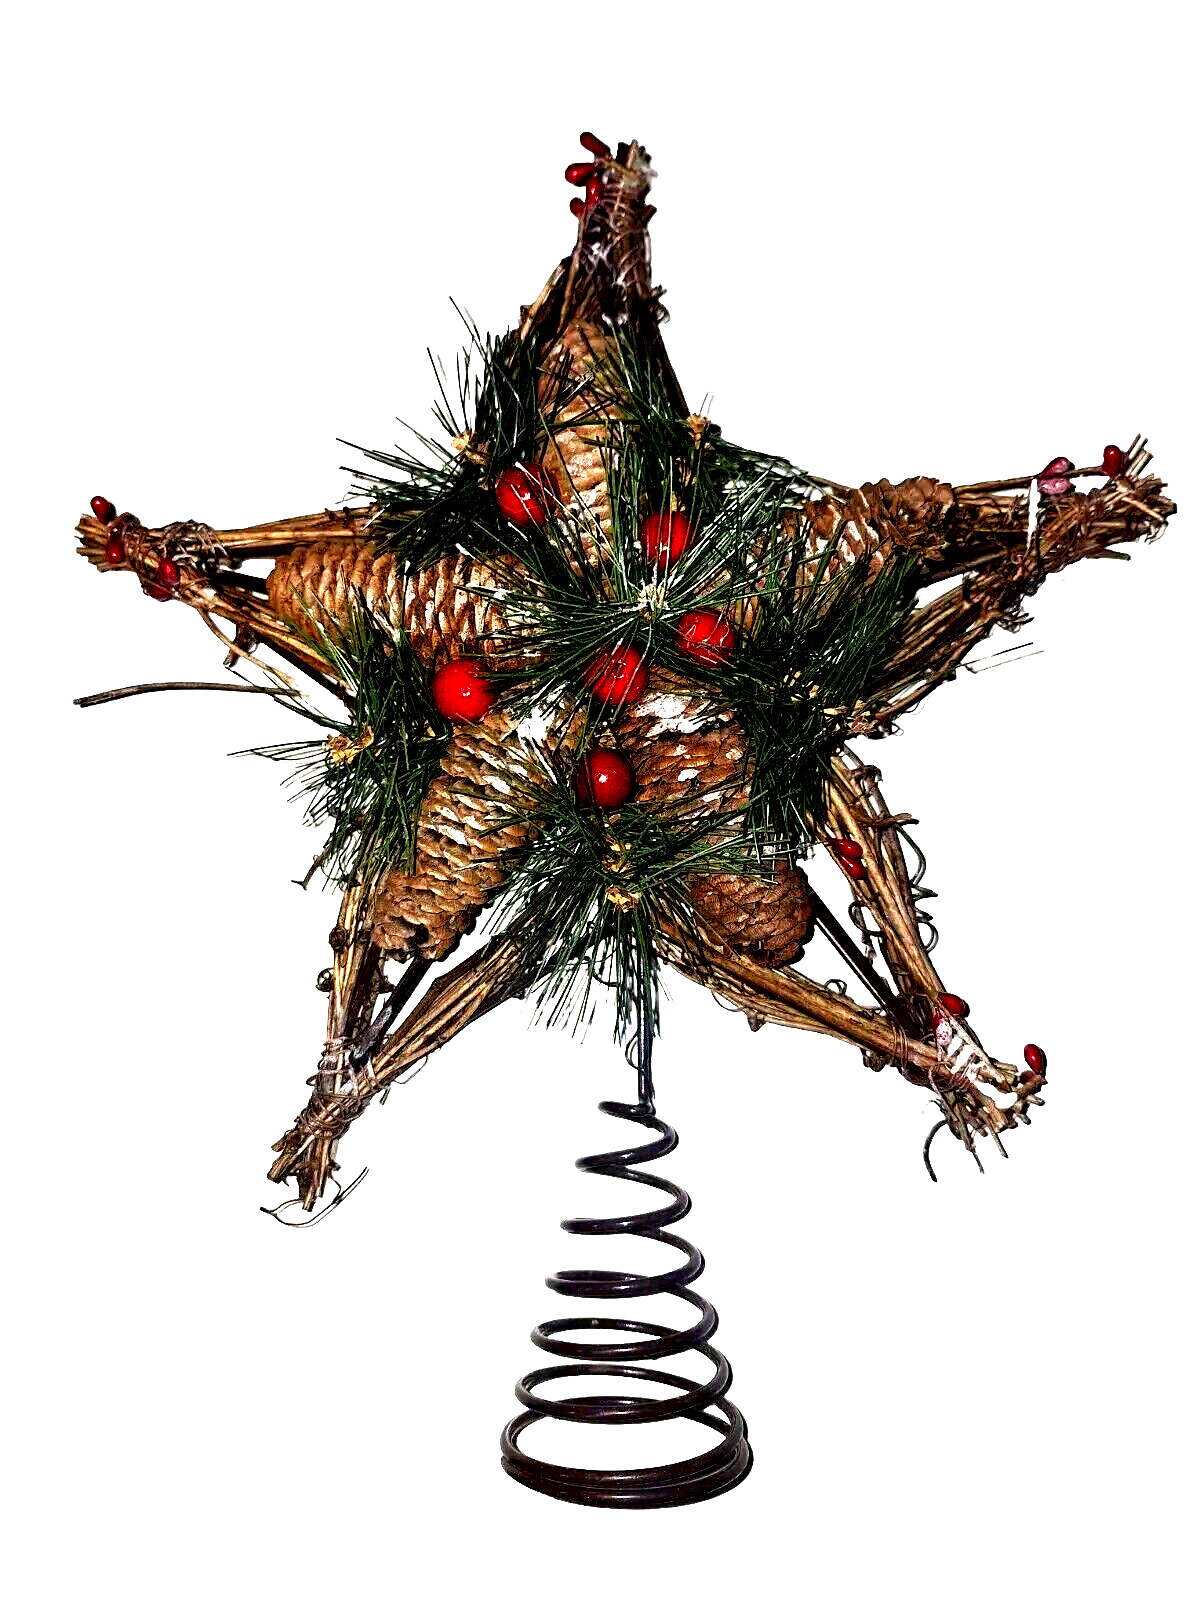 Rustic Twine Star Pine Cones Holly Berries Christmas Tree Topper Holiday Decor